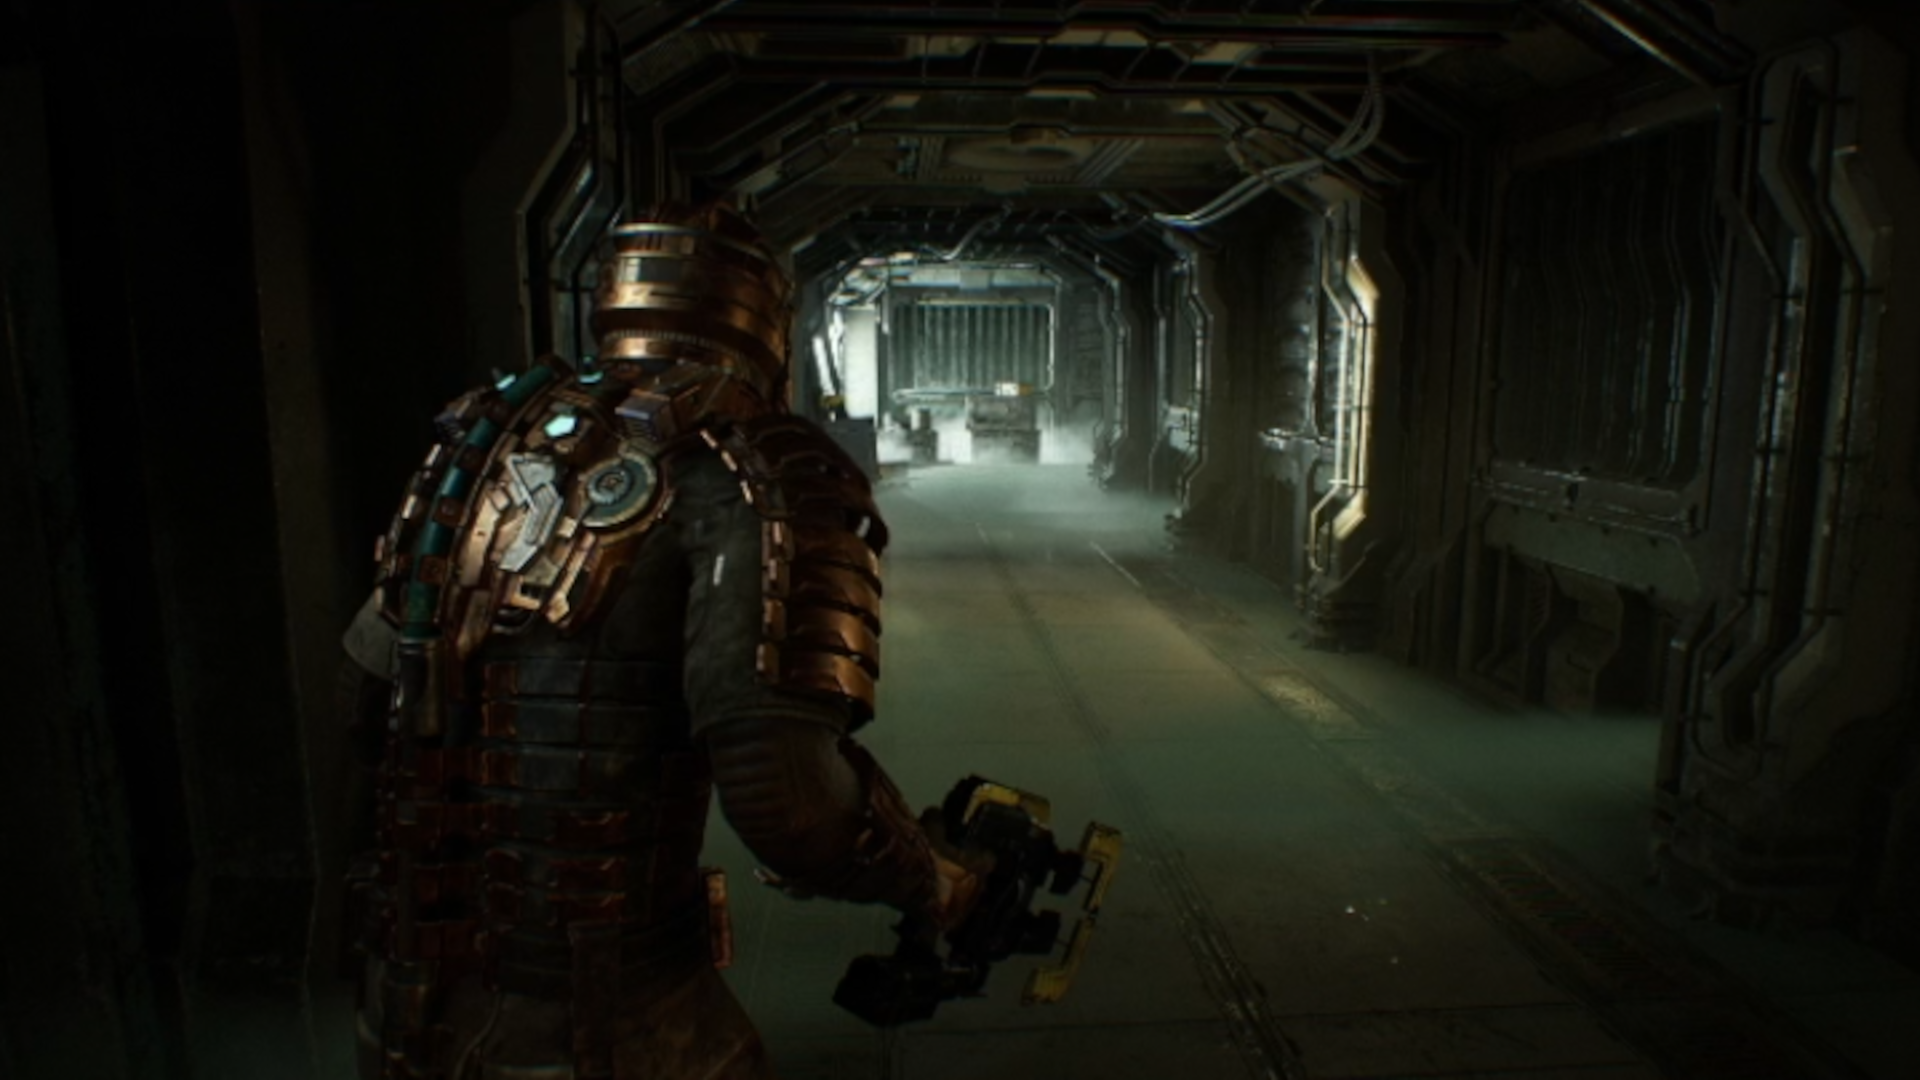 Dead Space Remake: Combat, Graphics, and Everything Else We Learned From the First Dev Showcase